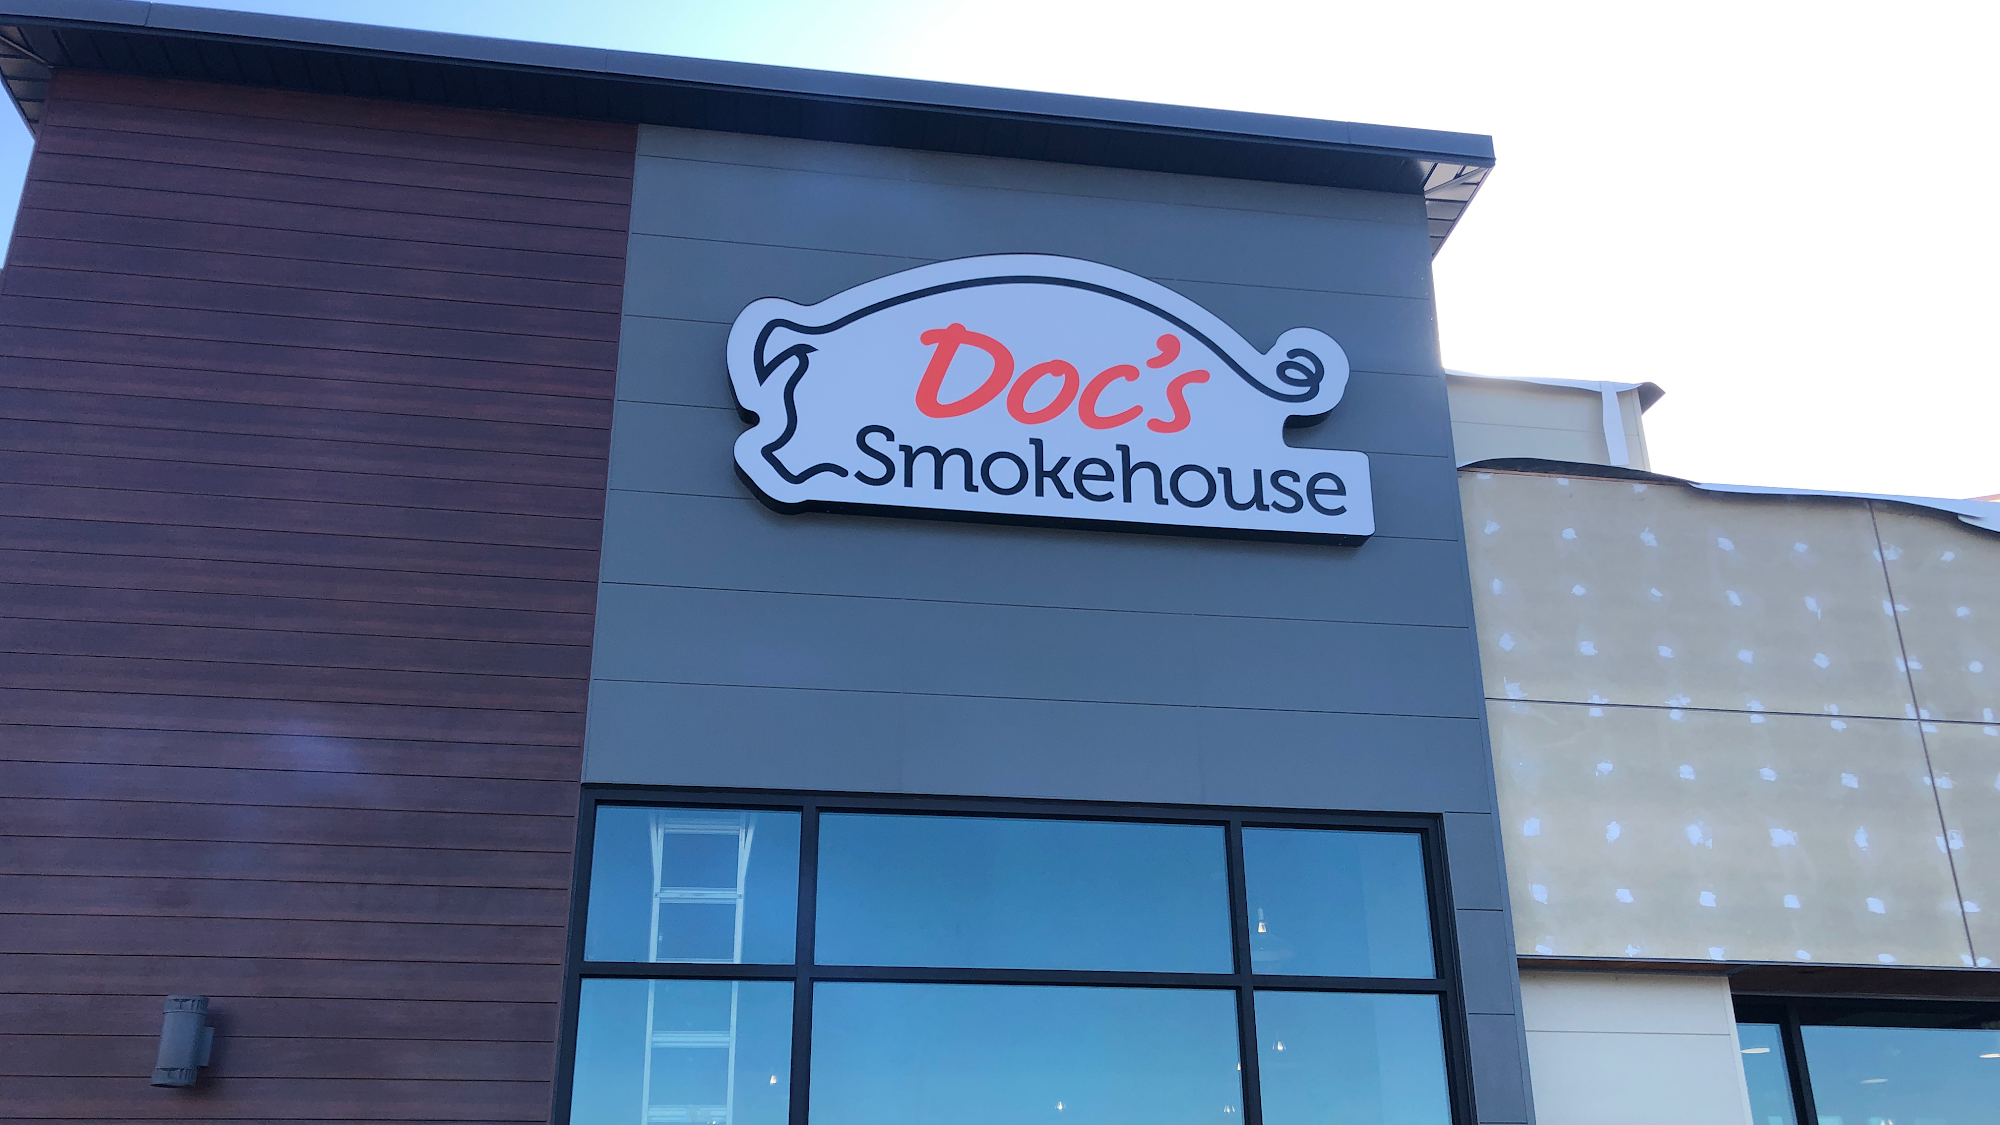 Doc's Smokehouse & Catering